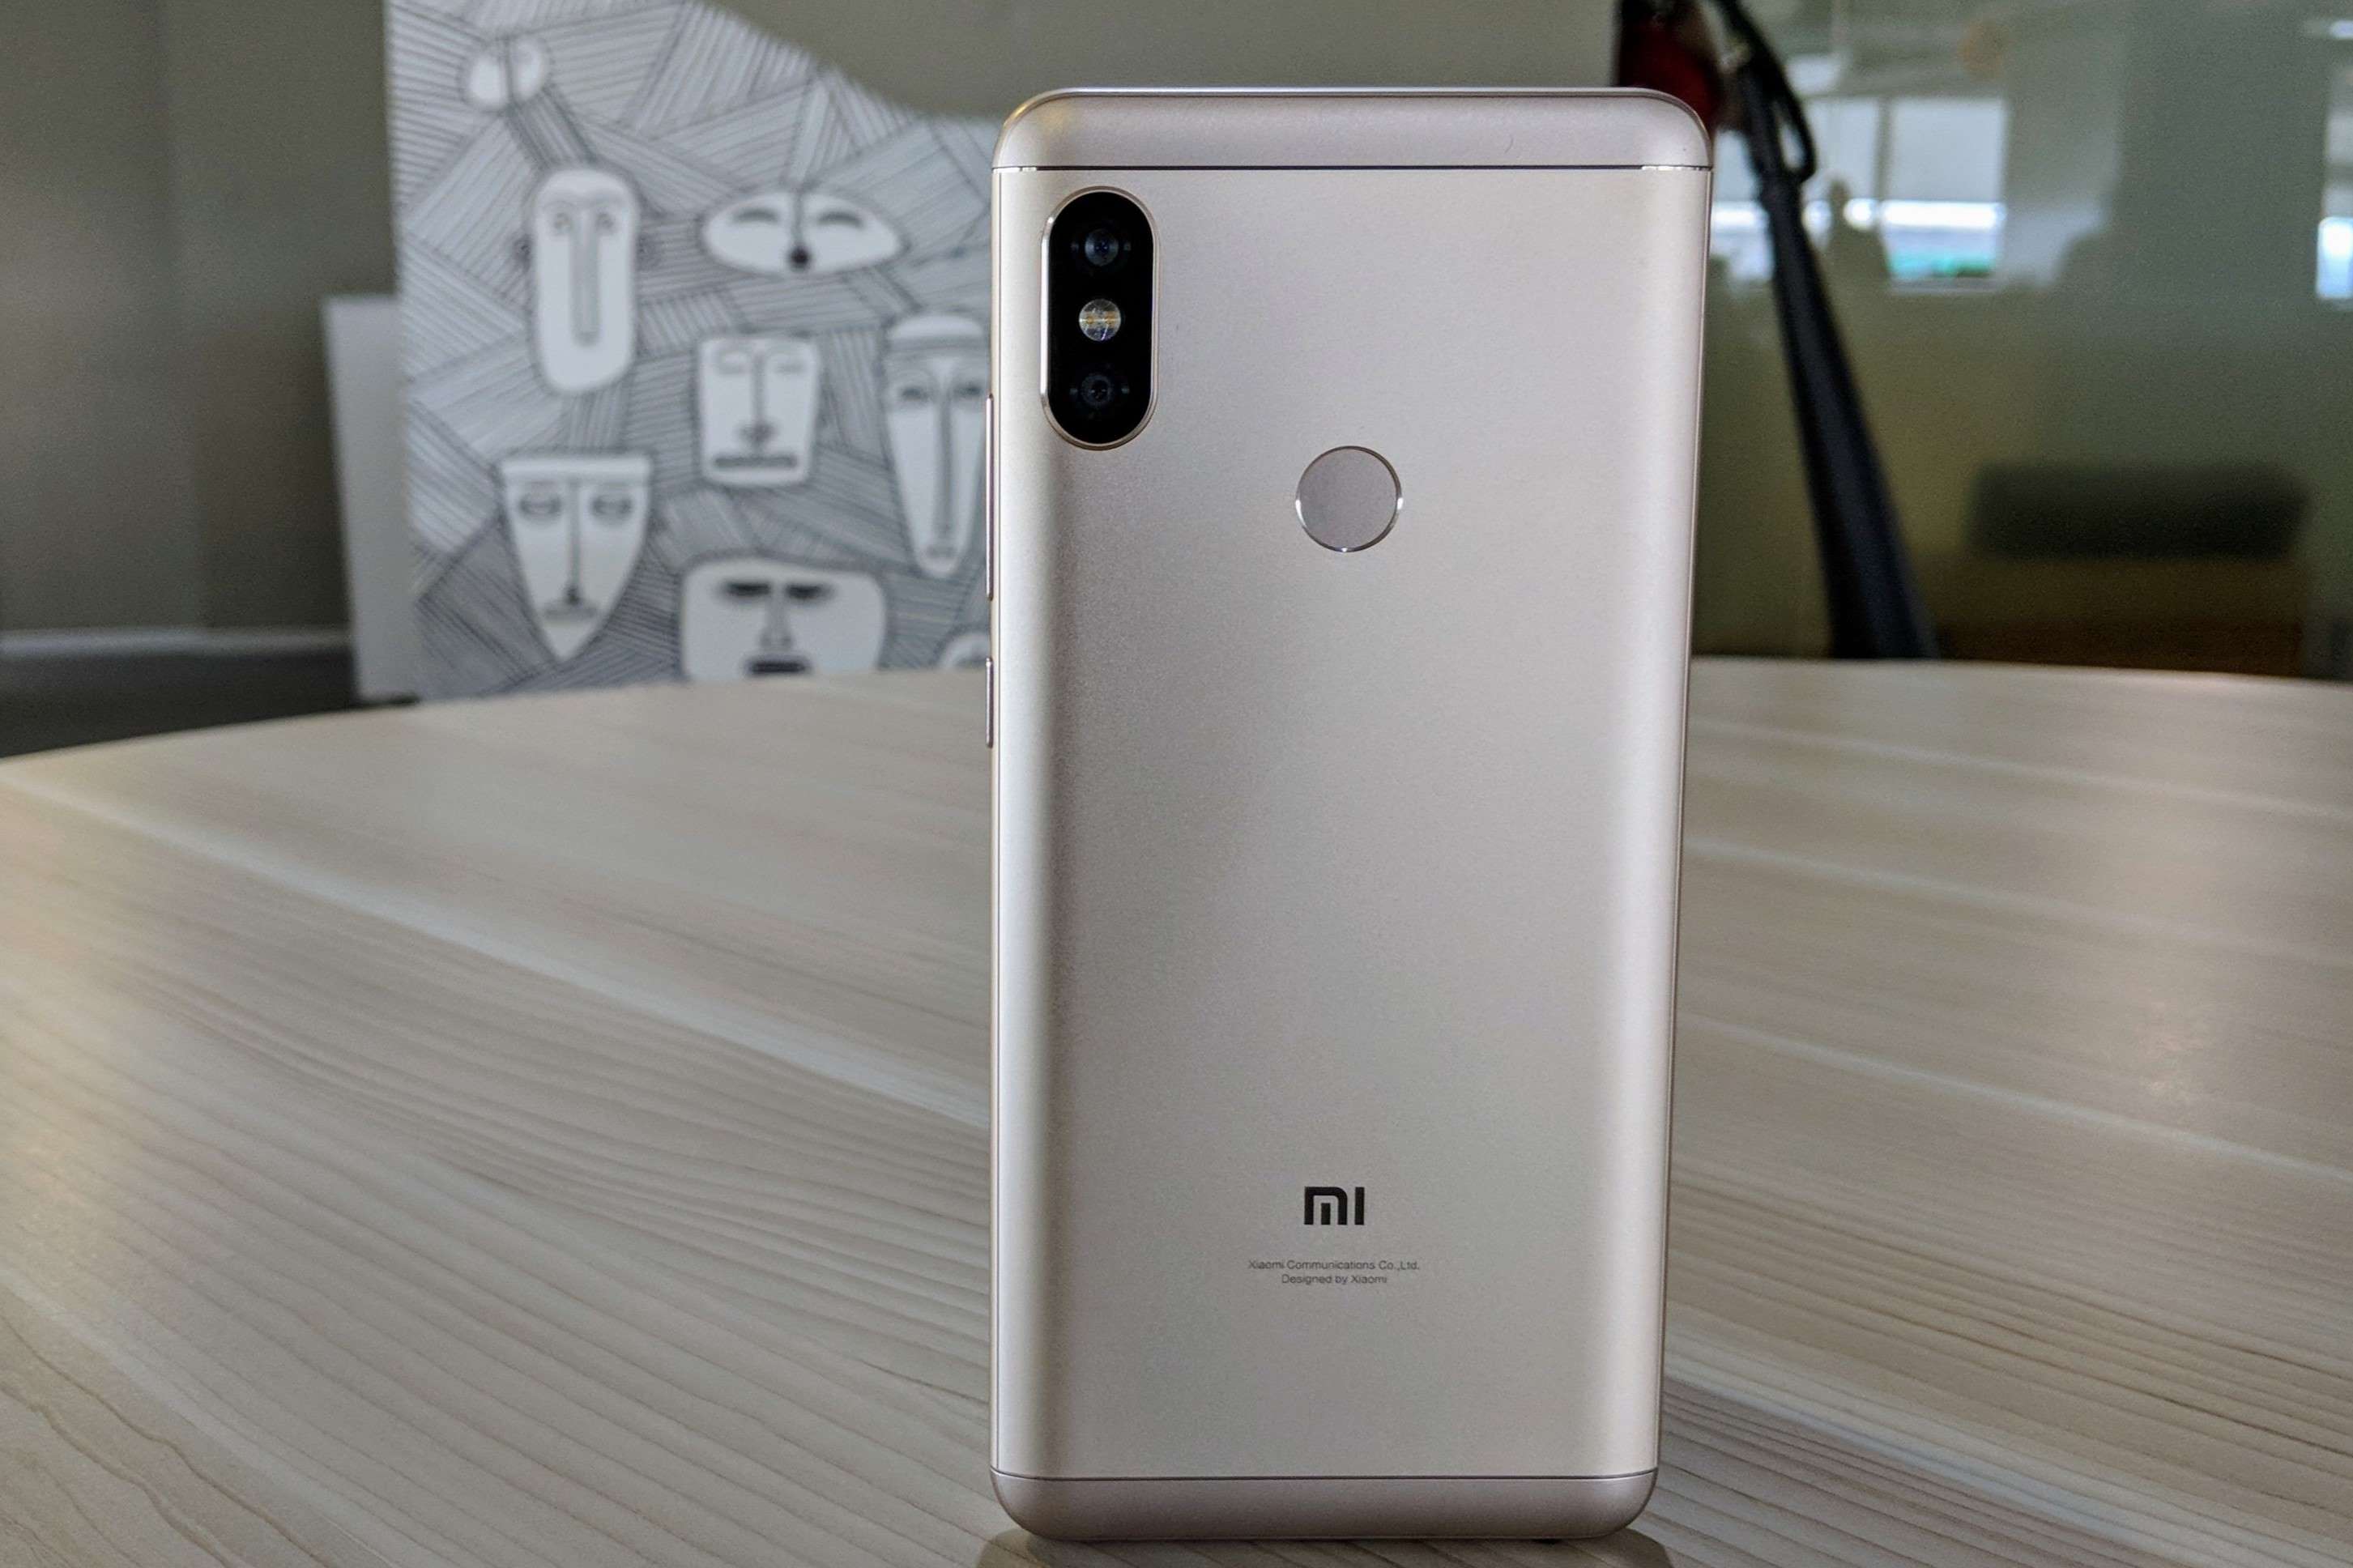 Comprehensive Guide: Getting All Updates On Redmi Note 5 Pro